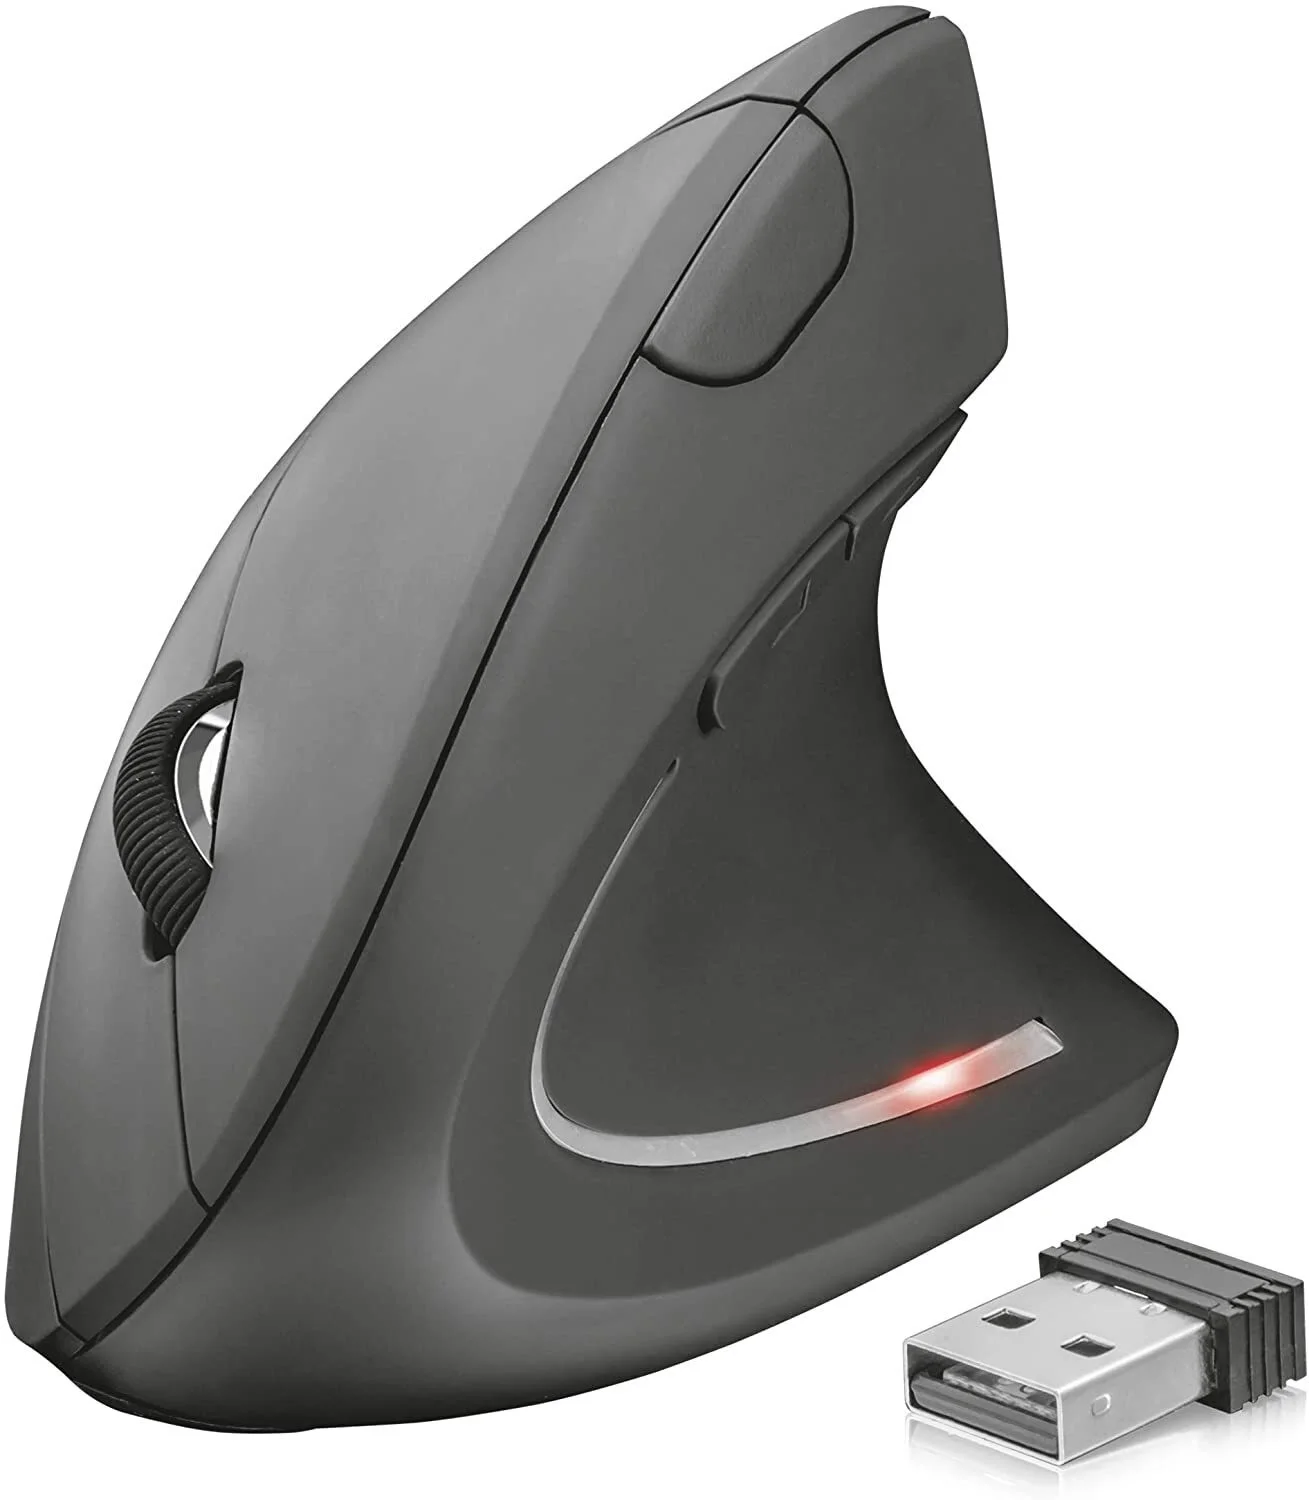 

Trust 22879 Verto Wireless Ergonomic Mouse for PC and Laptop, Illuminated, 800-1600 DPI, 6 Buttons, Right Hand Users, Black